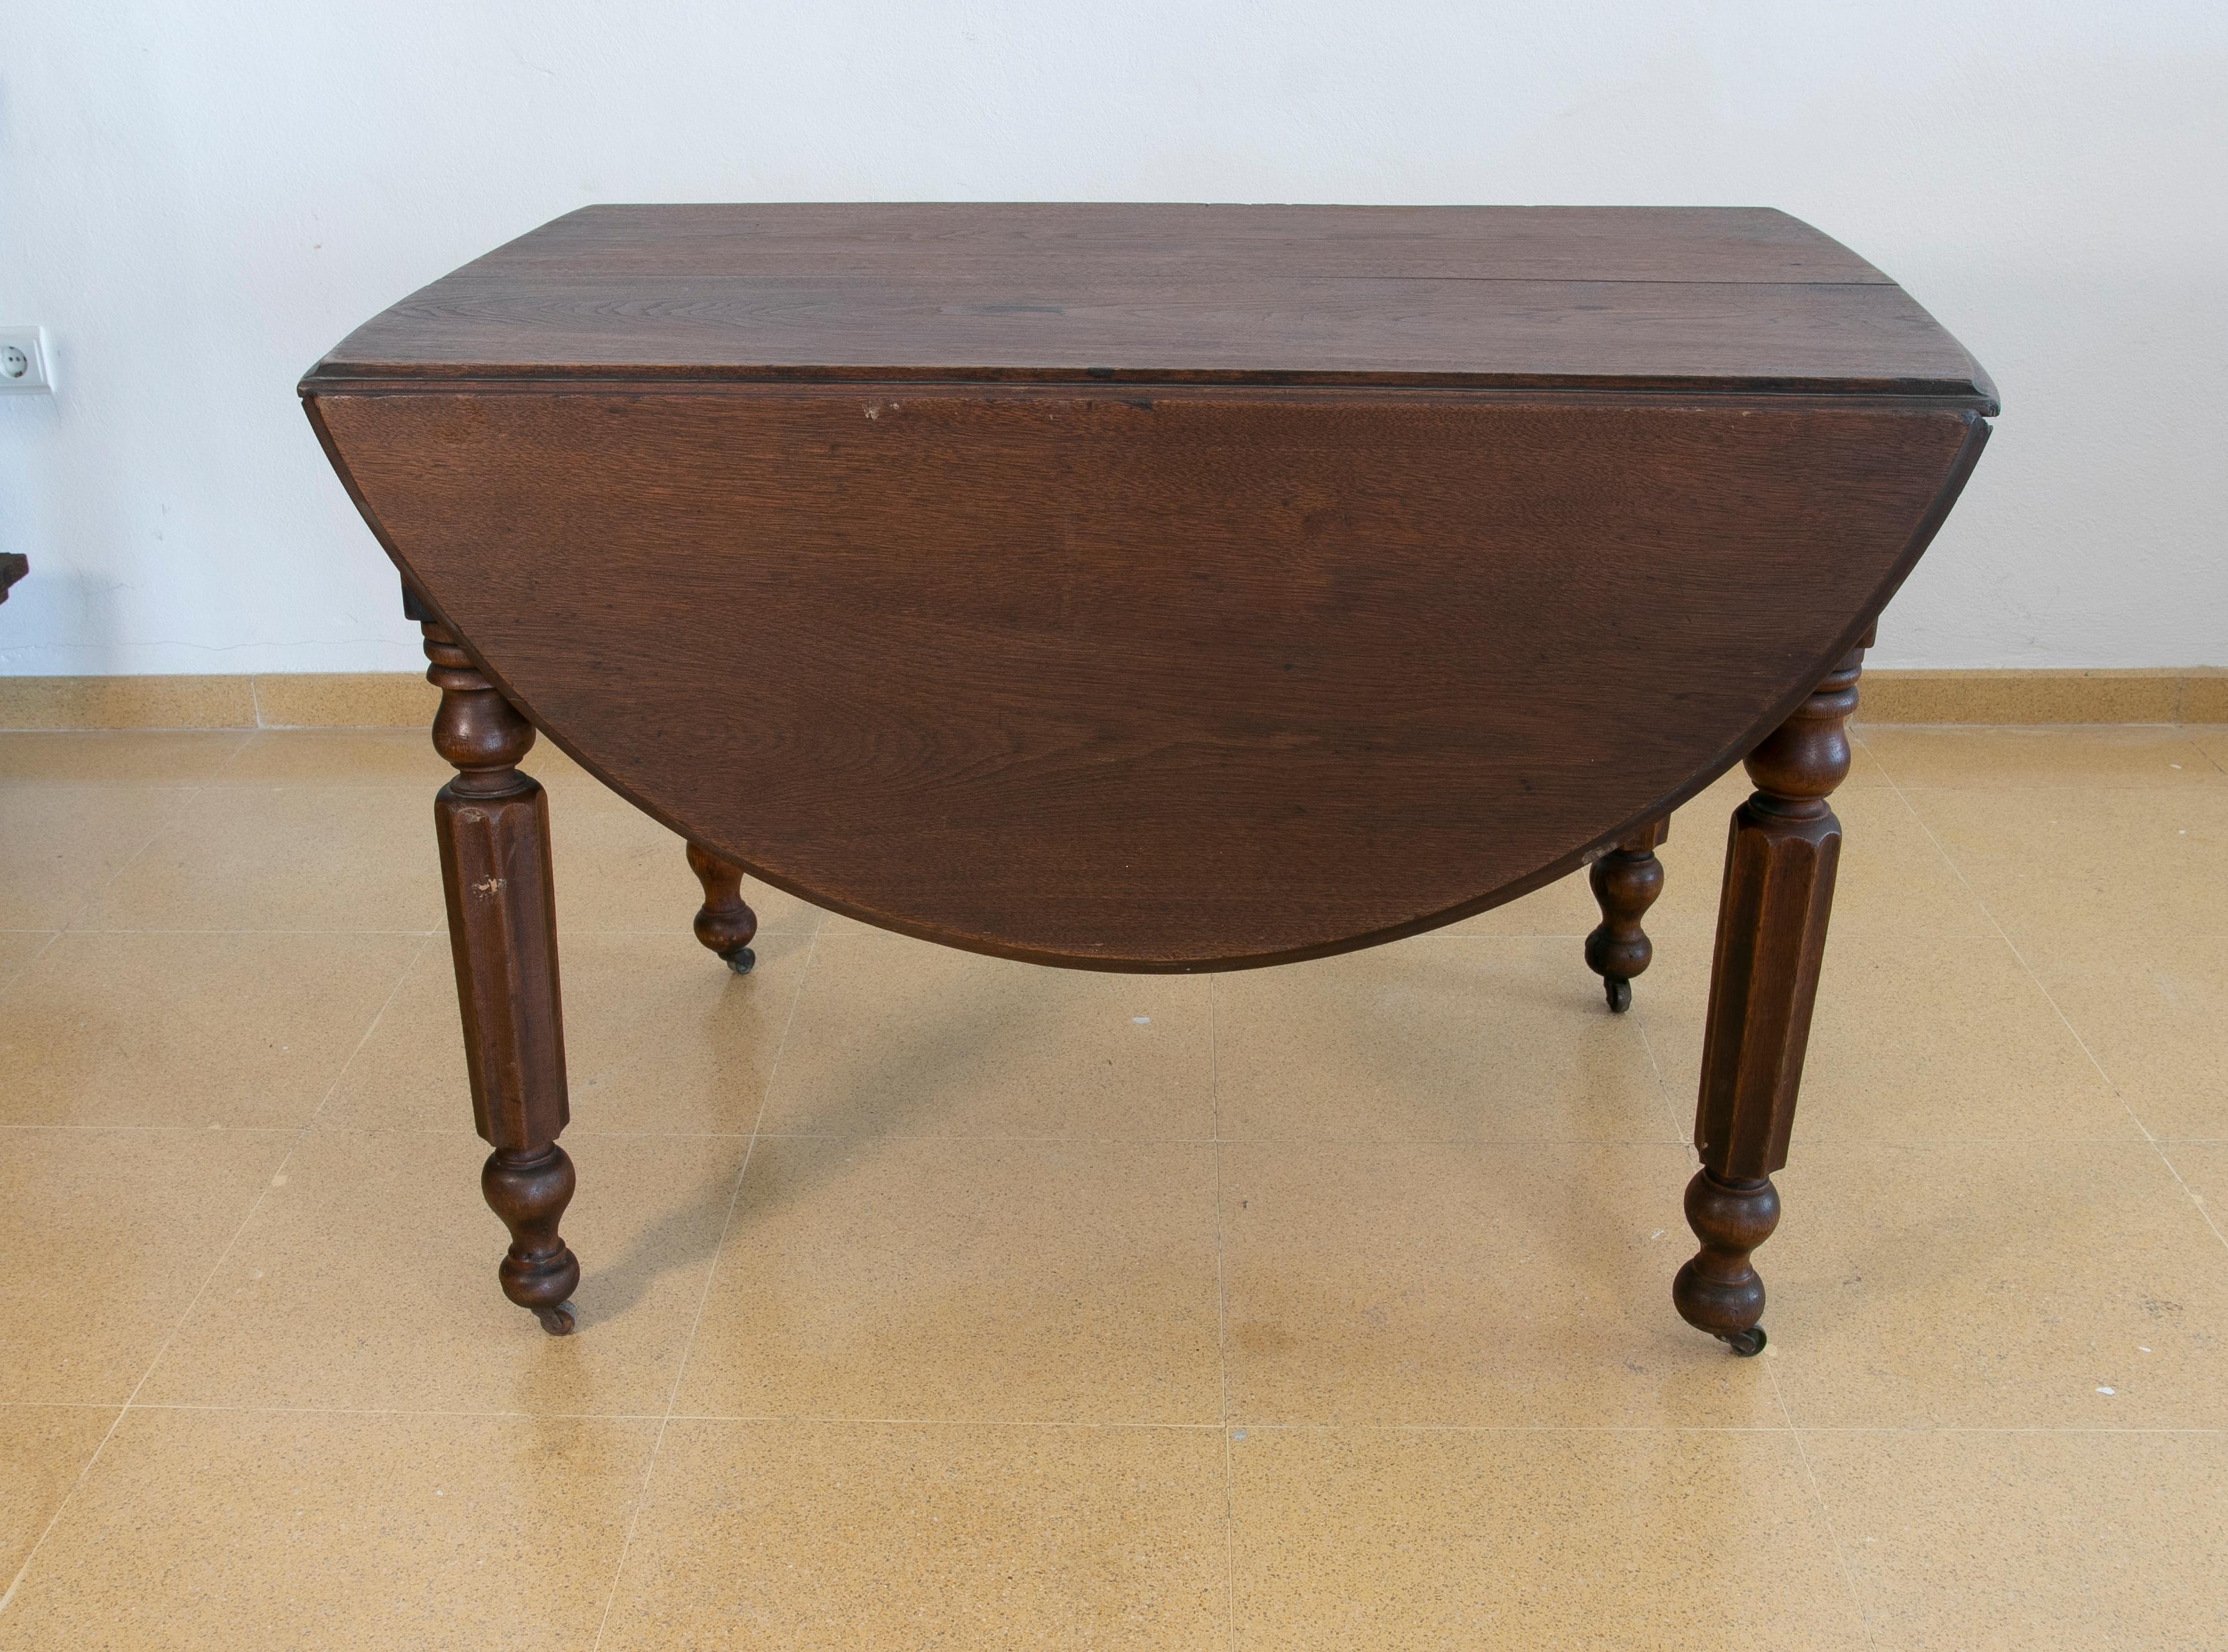 English wooden wing table with brass wheels.